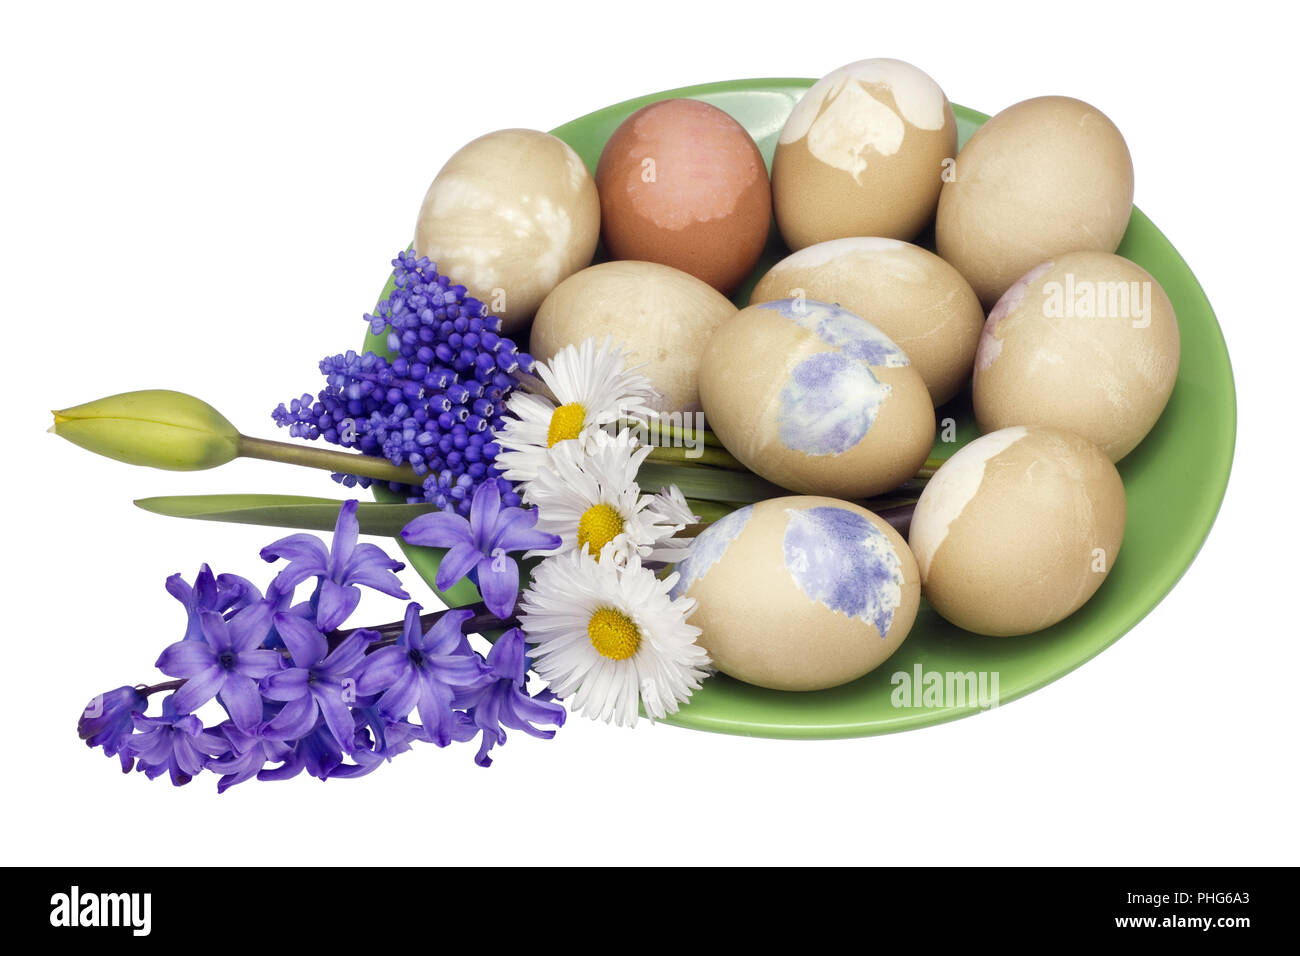 Ecologically Easter eggs Stock Photo